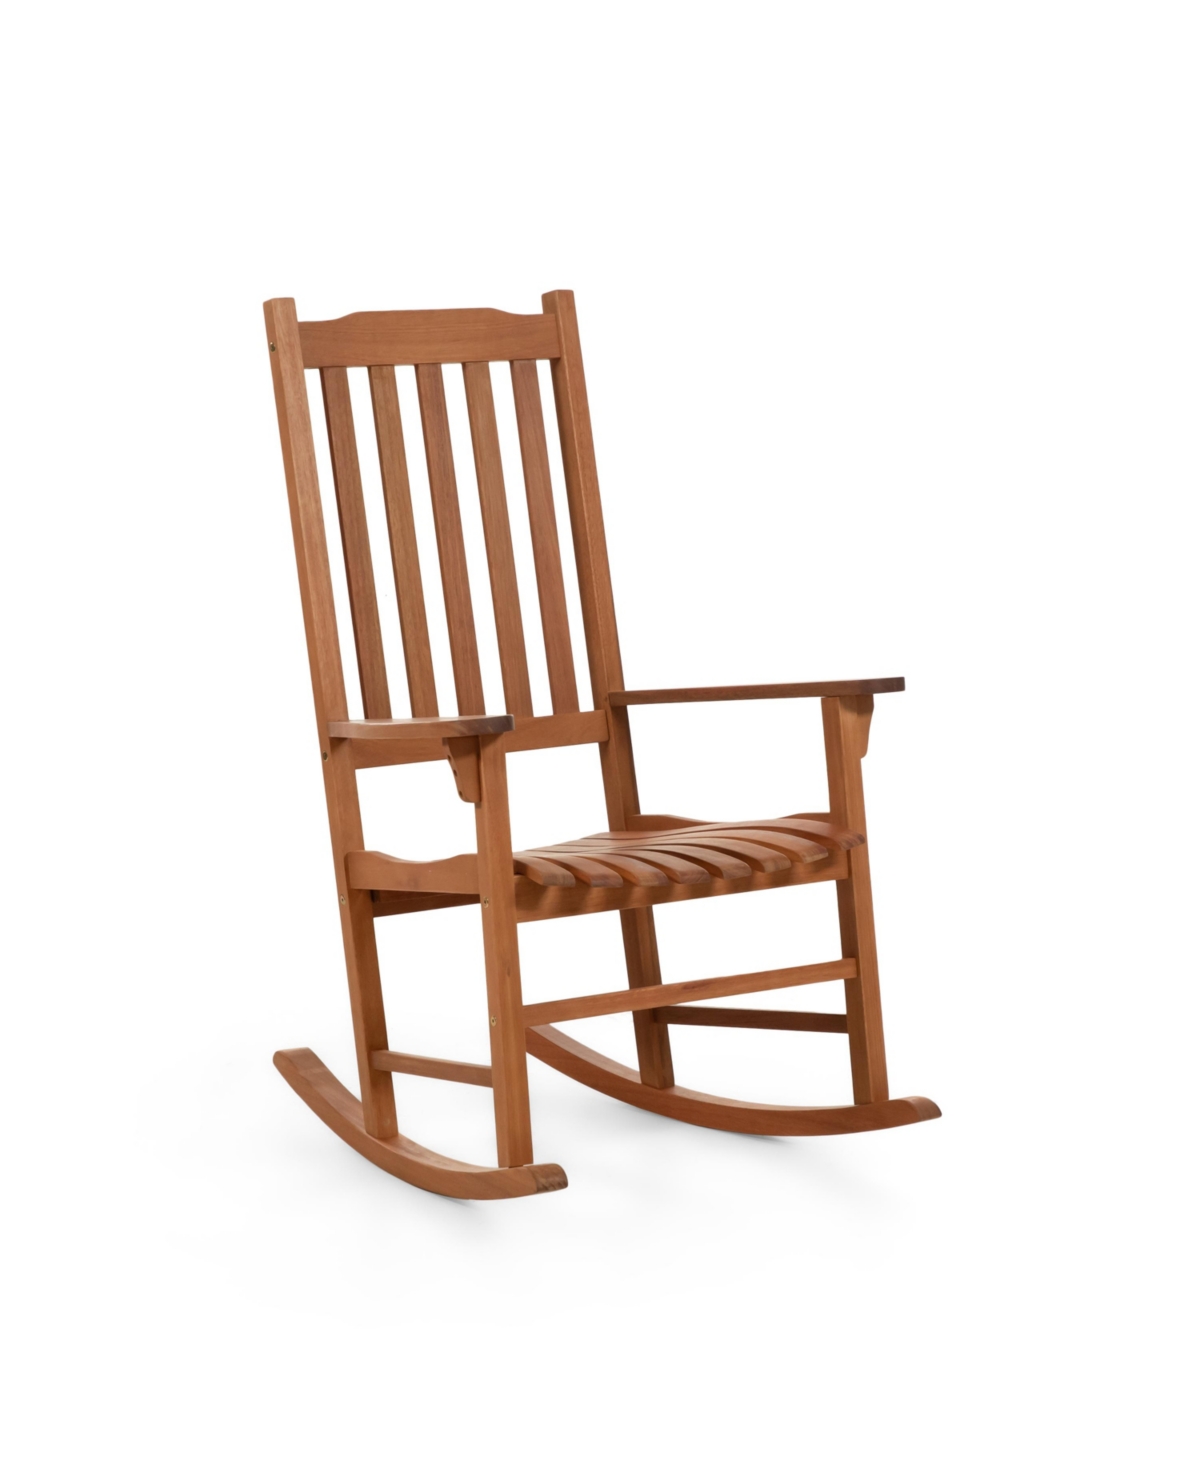 Furniture Of America 45" Solid Eucalyptus Wood Outdoor Patio Rocking Chair In Natural